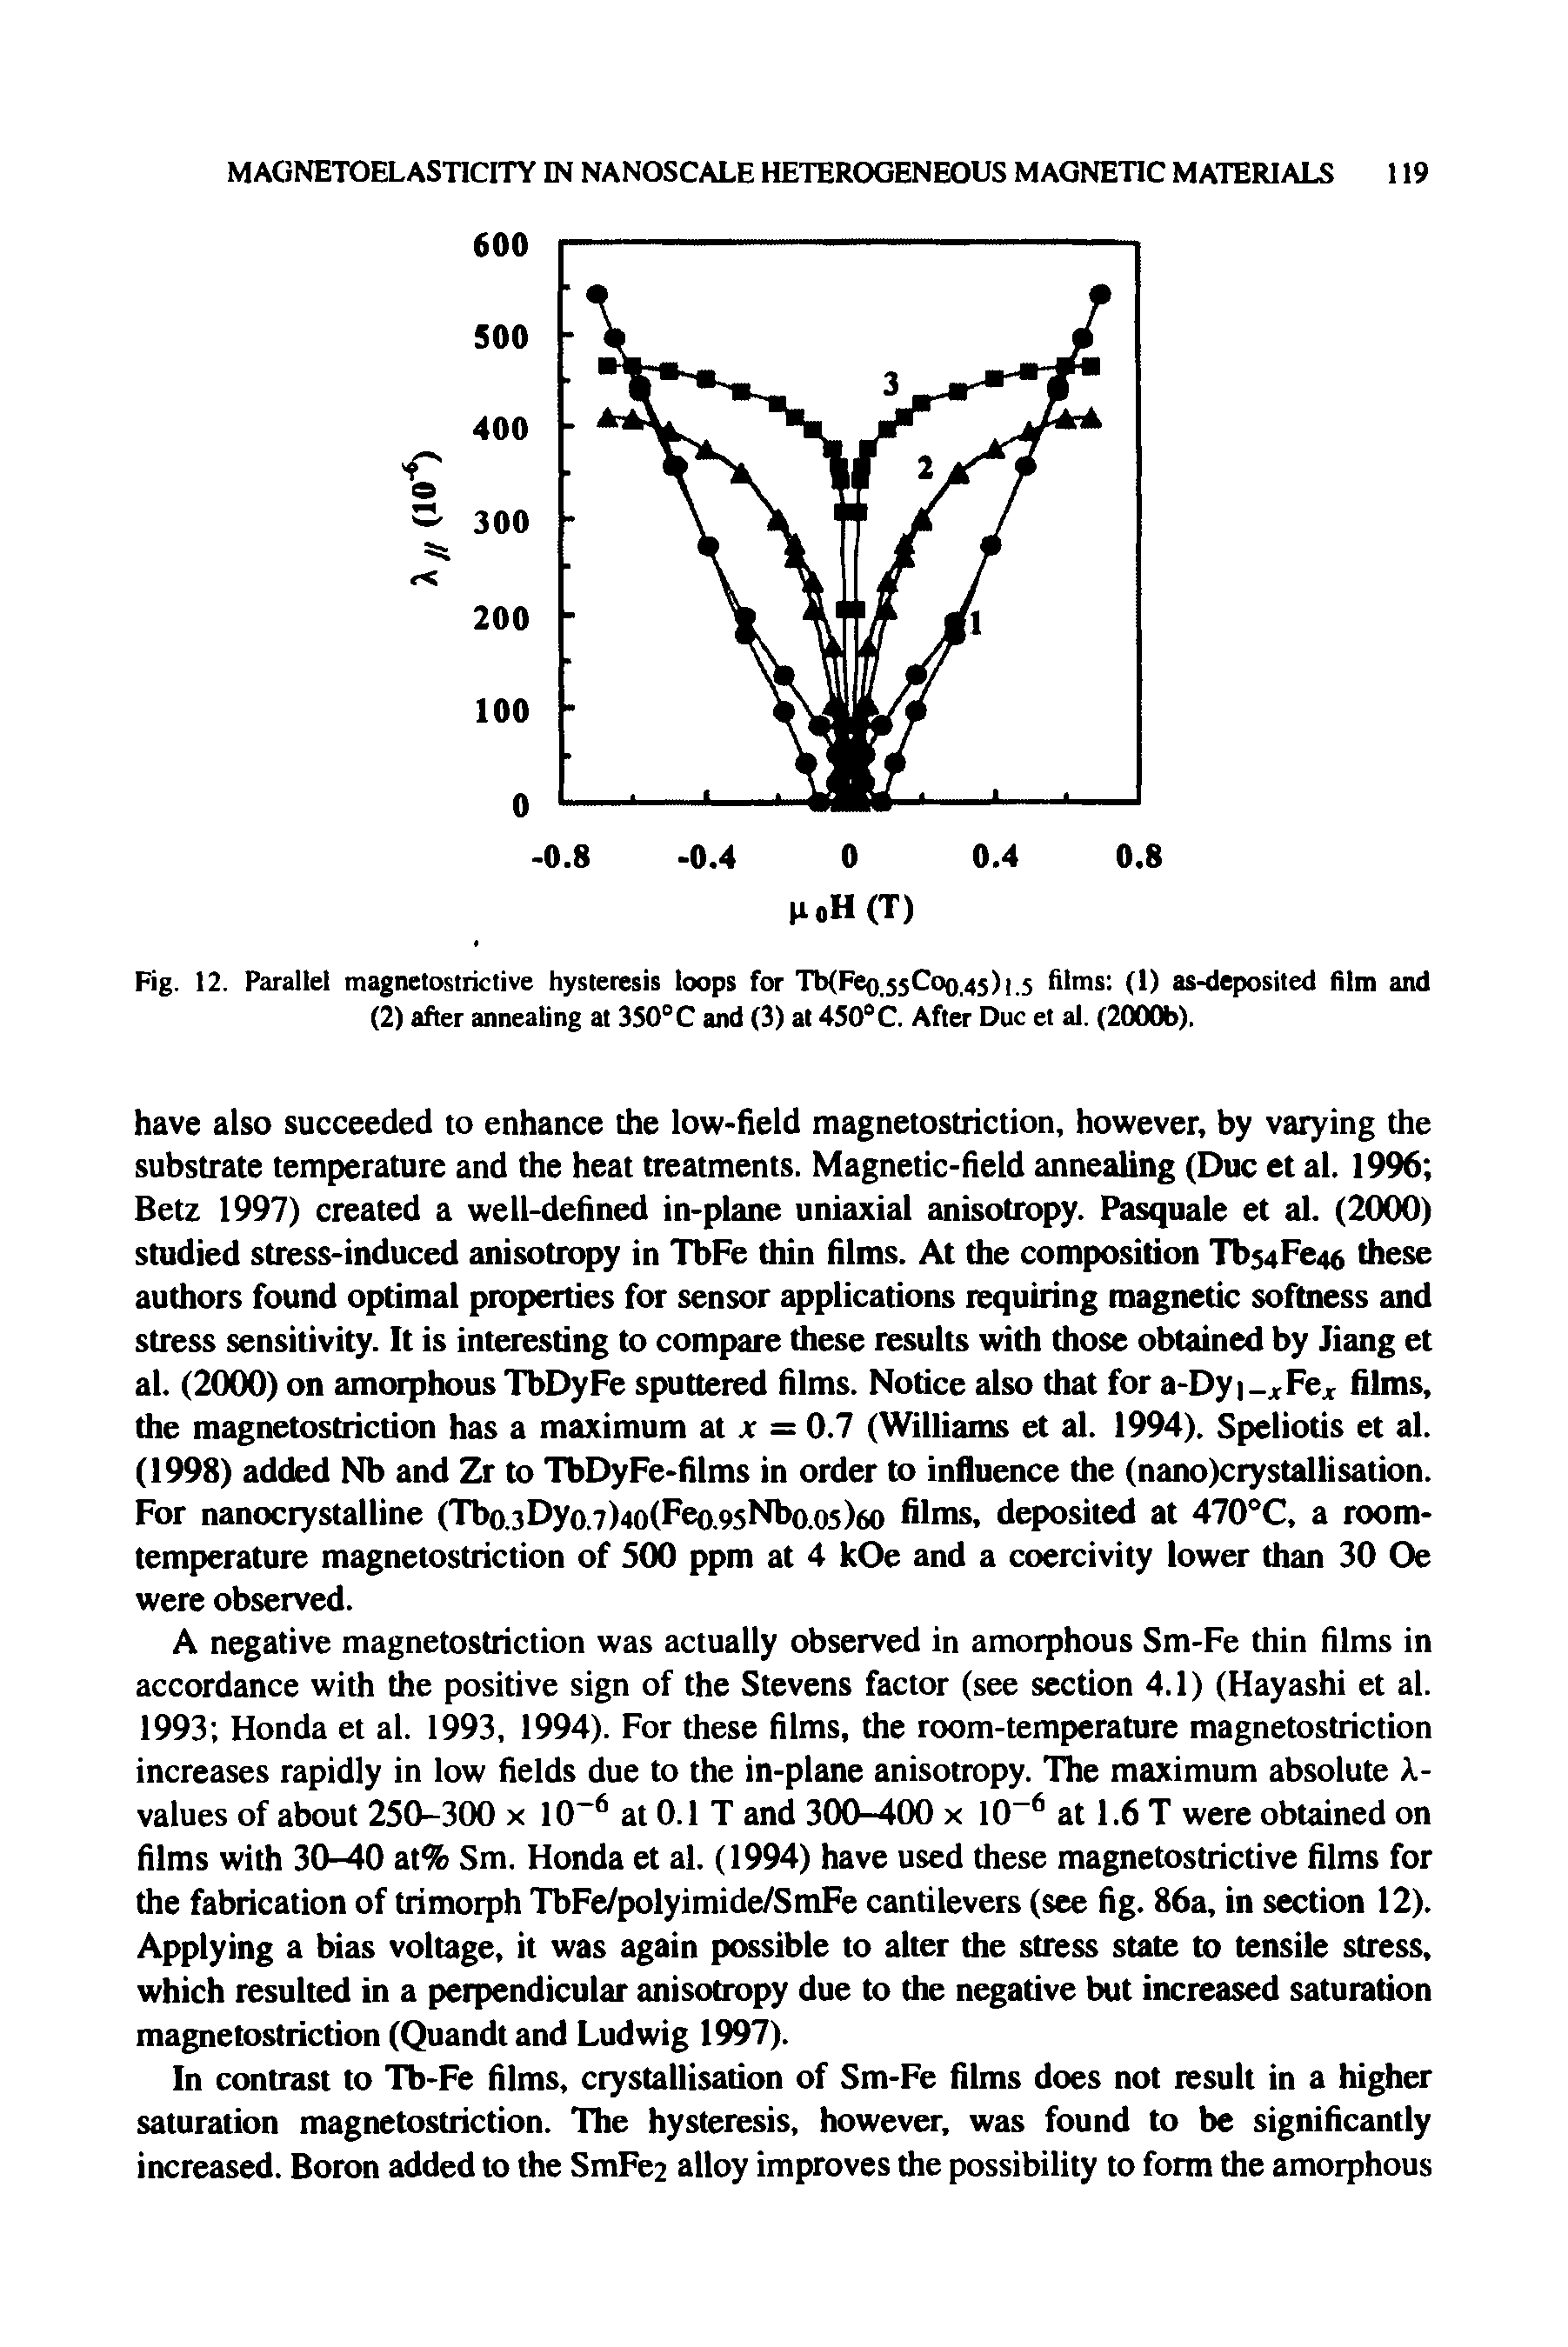 Fig. 12. Parallel magnetostrictive hysteresis loops for TbtFeo.ssCoo.asJi.s Aims (1) as-deposited film and (2) after annealing at 350° C and (3) at 450° C. After Due et al. (2000b).